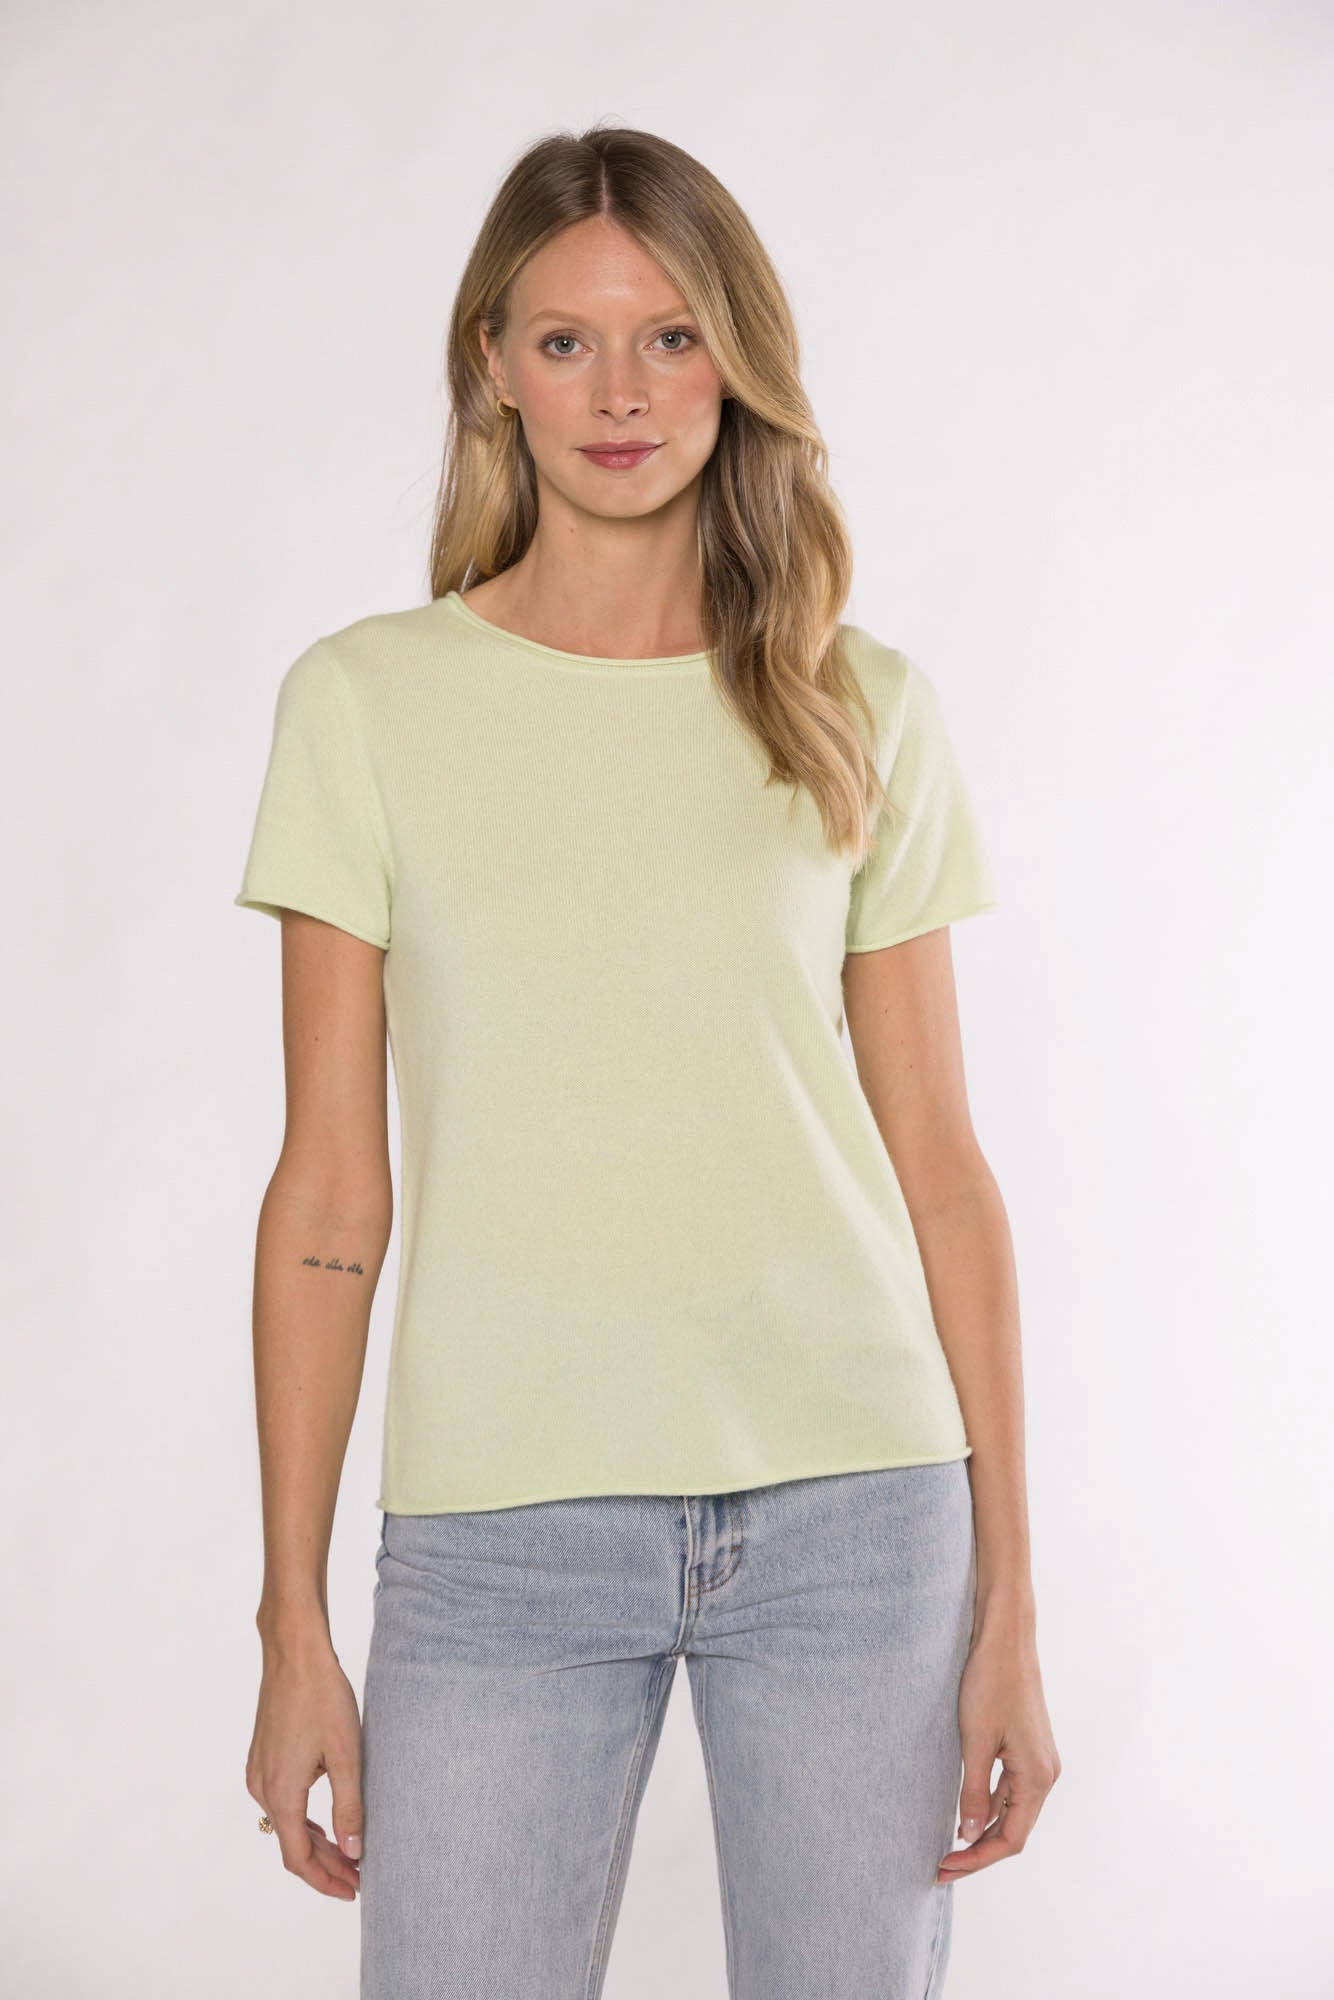 Seamless pullover in brushed cashmere, lime Knitwear for Women